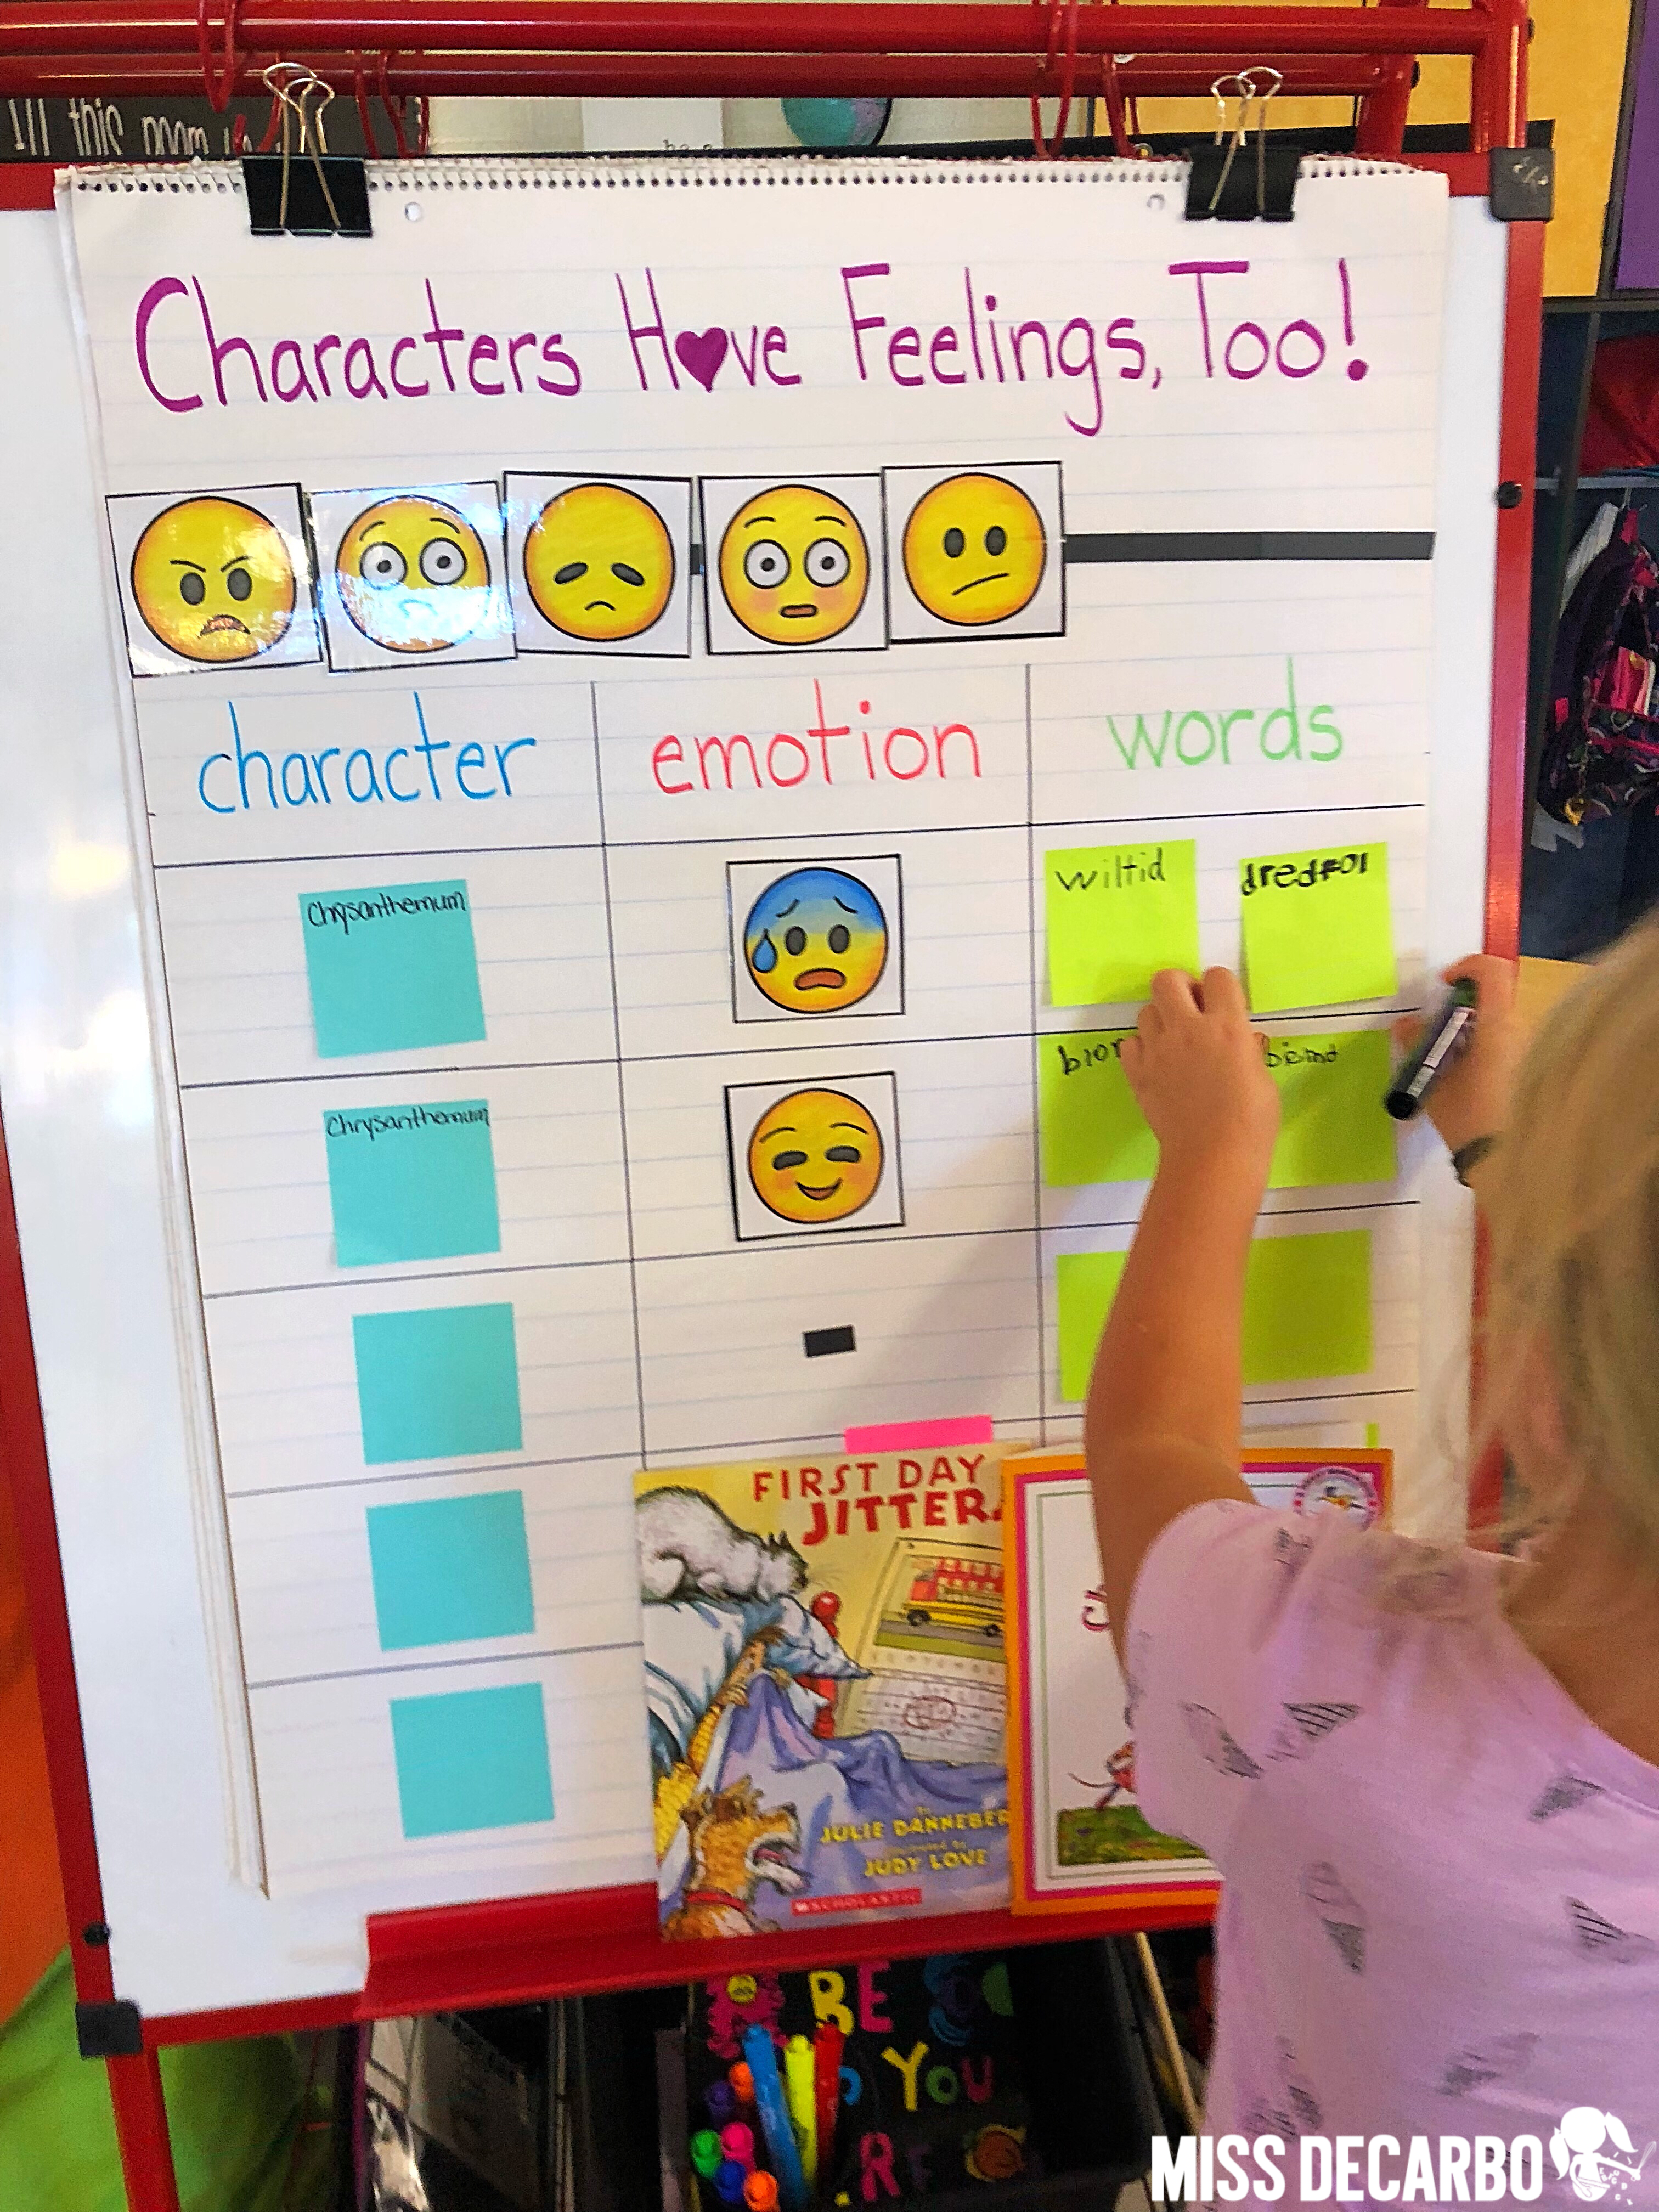 interactive anchor chart for character emotions and the words or phrases that helped us identify the character's emotions